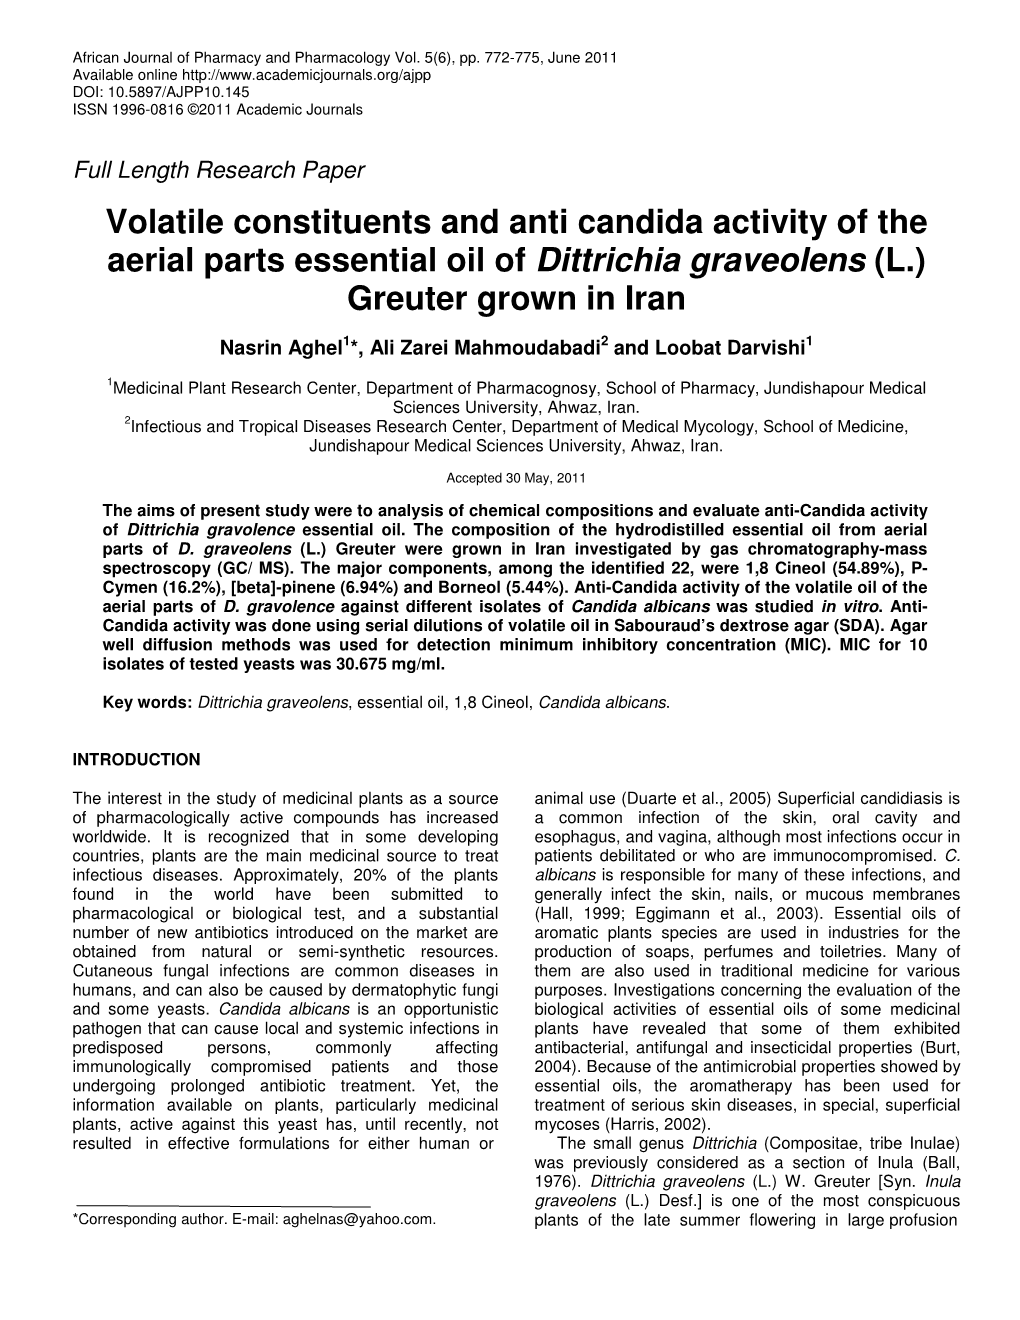 Volatile Constituents and Anti Candida Activity of the Aerial Parts Essential Oil of Dittrichia Graveolens (L.) Greuter Grown in Iran